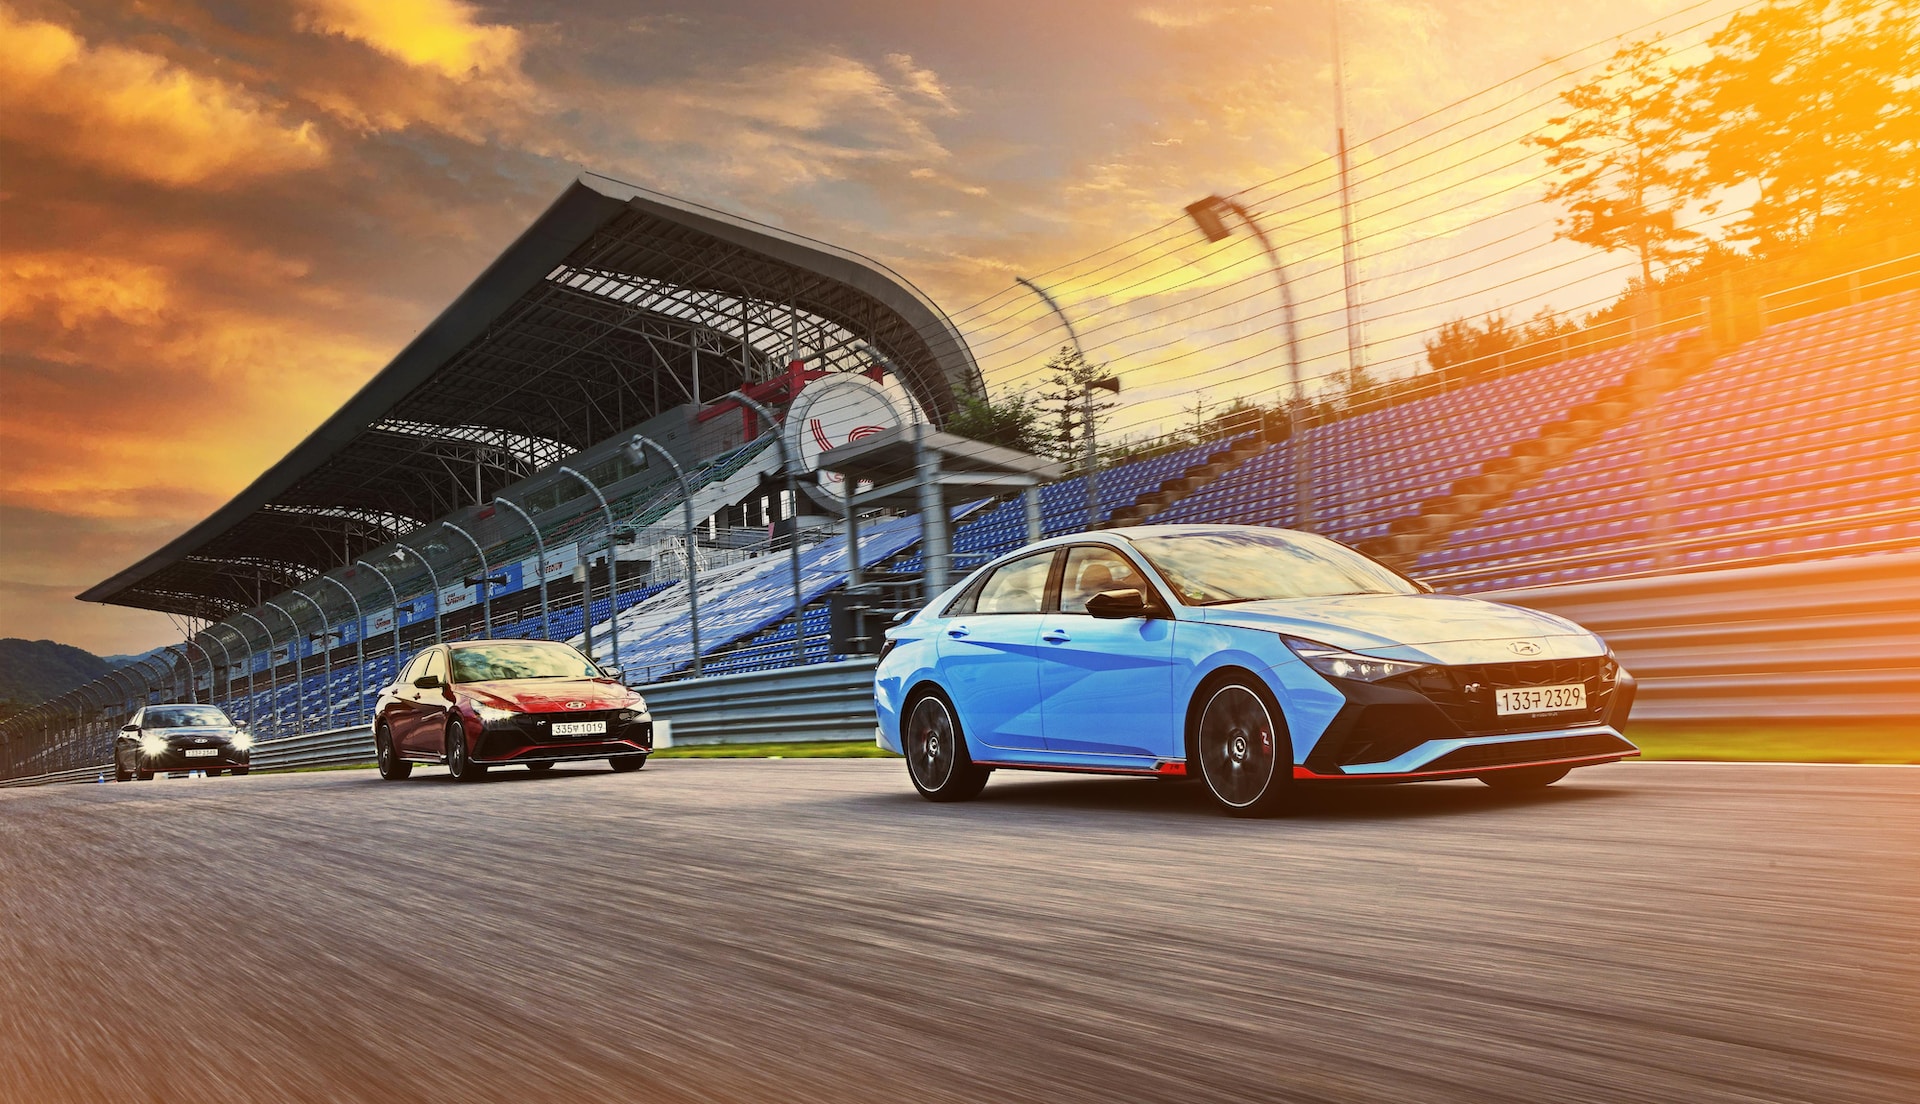 three Hyundai cars driving around a racetrack during sunset with the Blue one in the lead.